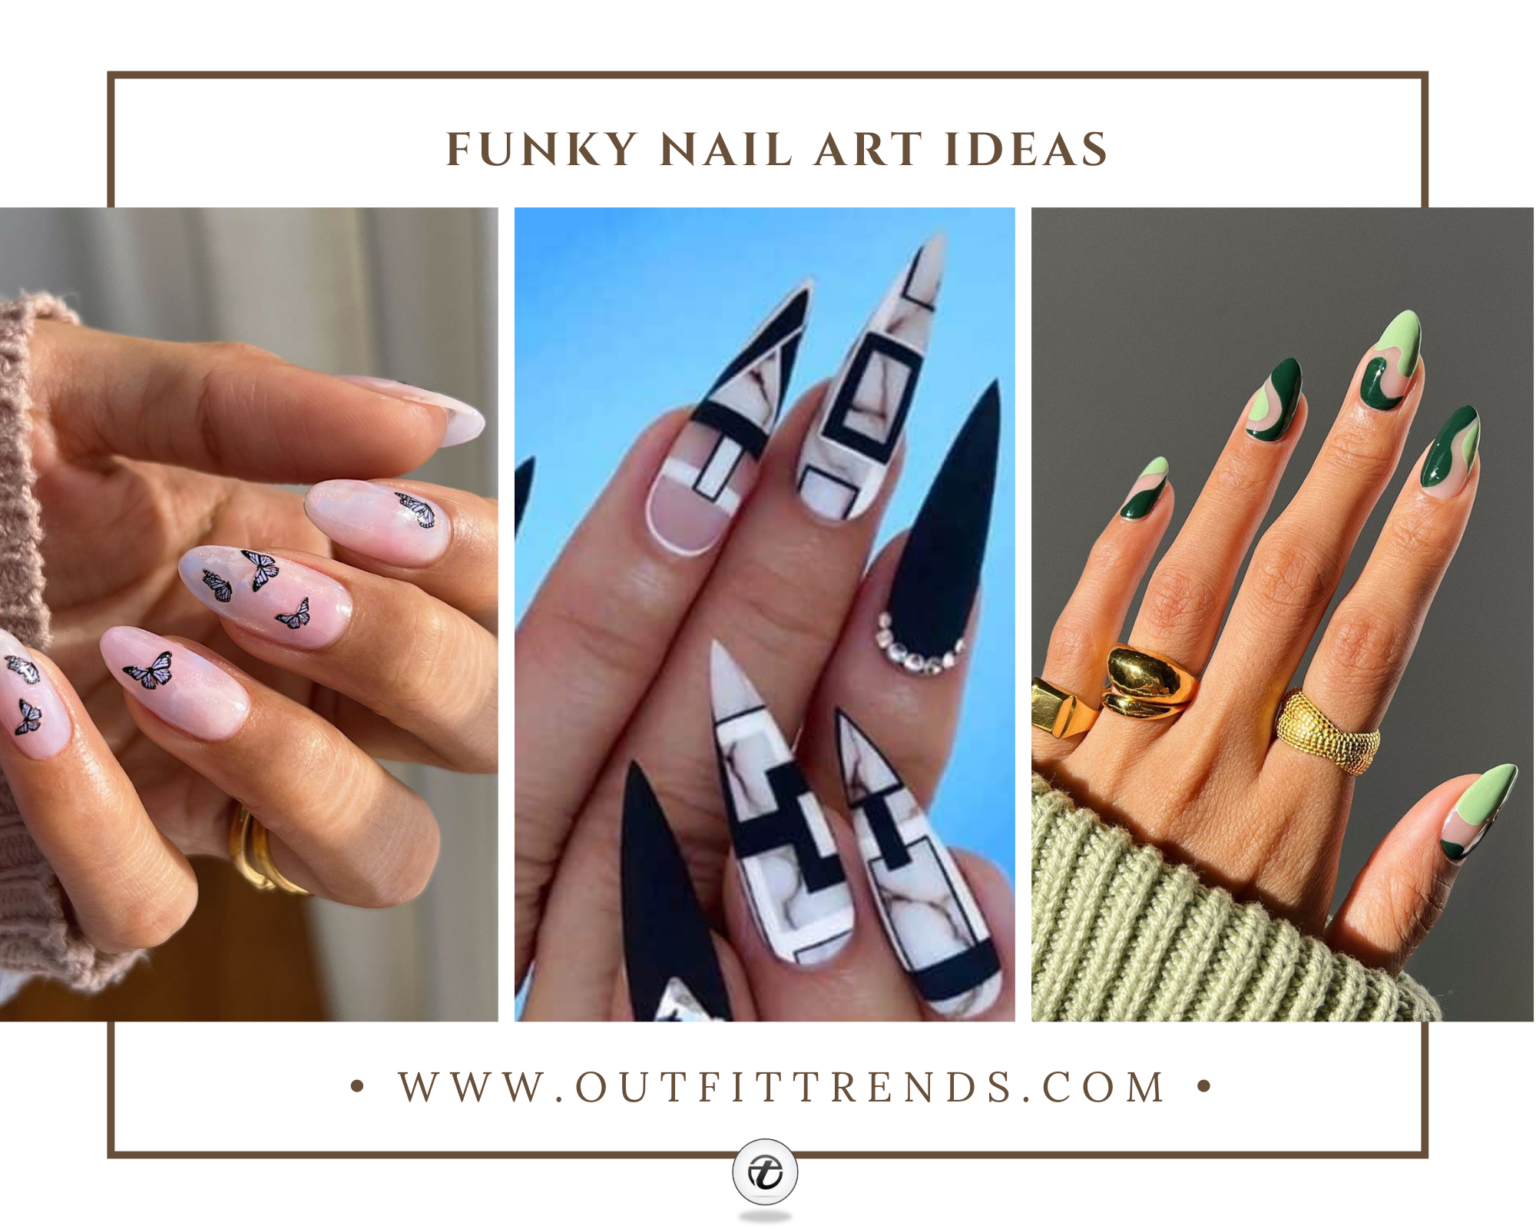 6. Funky Nail Art for Short Nails - wide 2